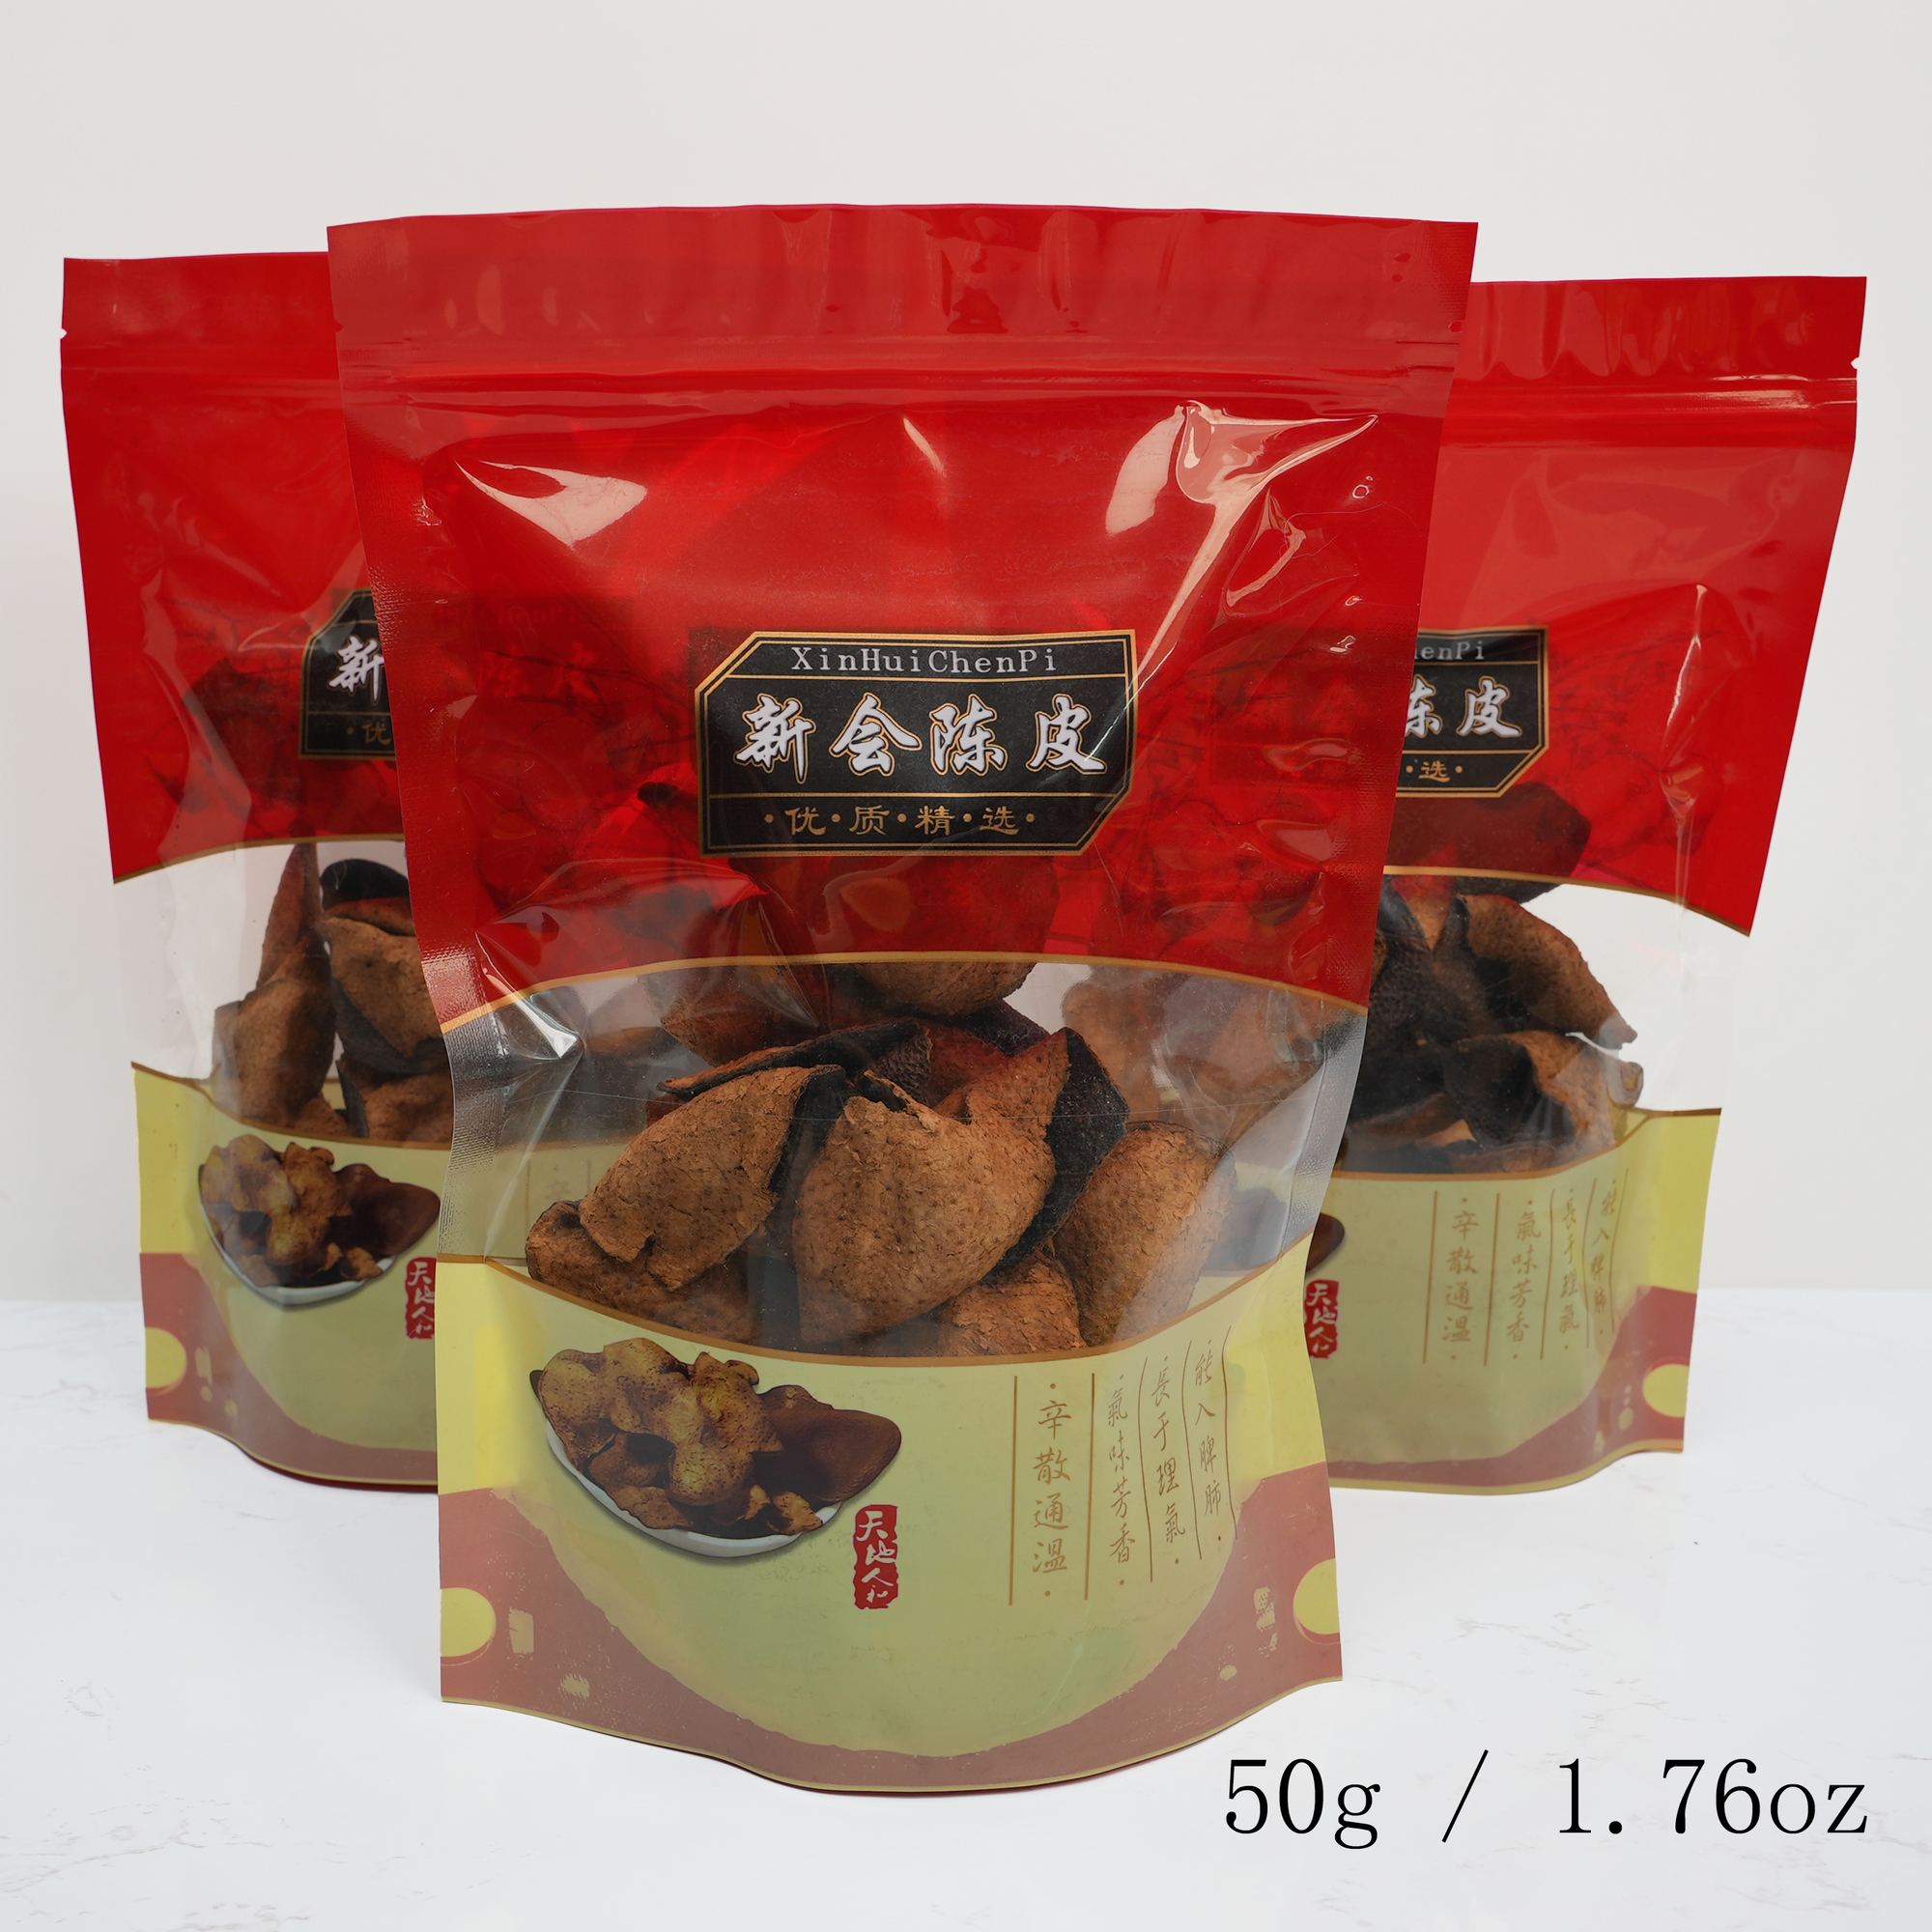 Chinese Chen Pi - Aged Orange Peel for Cooking (50g / 1.76oz) Aged 15 Year